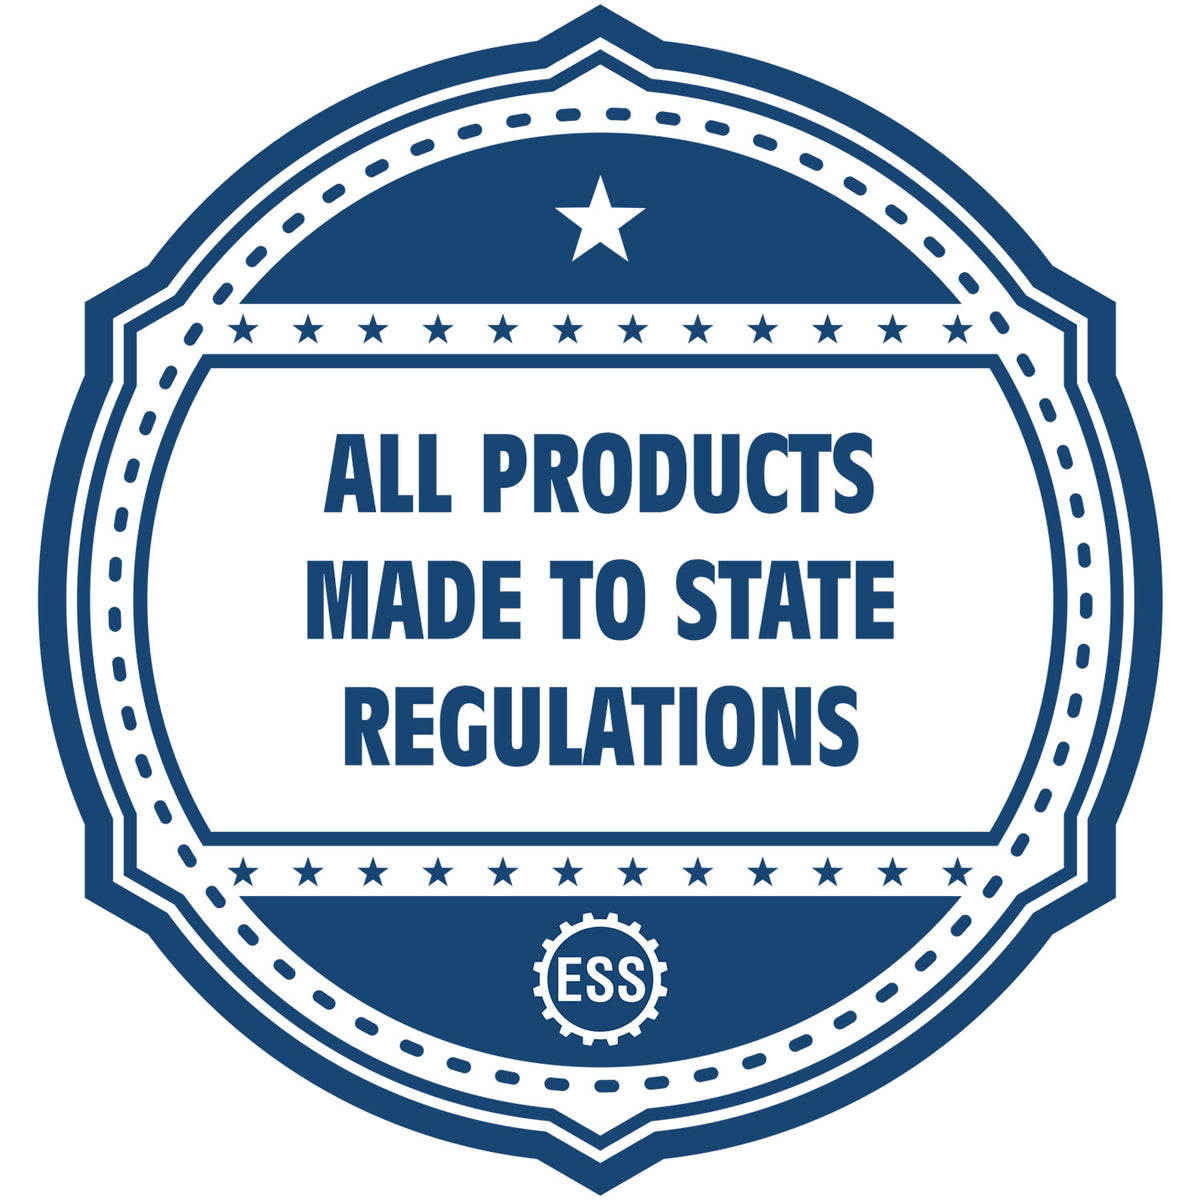 An icon or badge element for the Long Reach Kansas Land Surveyor Seal showing that this product is made in compliance with state regulations.